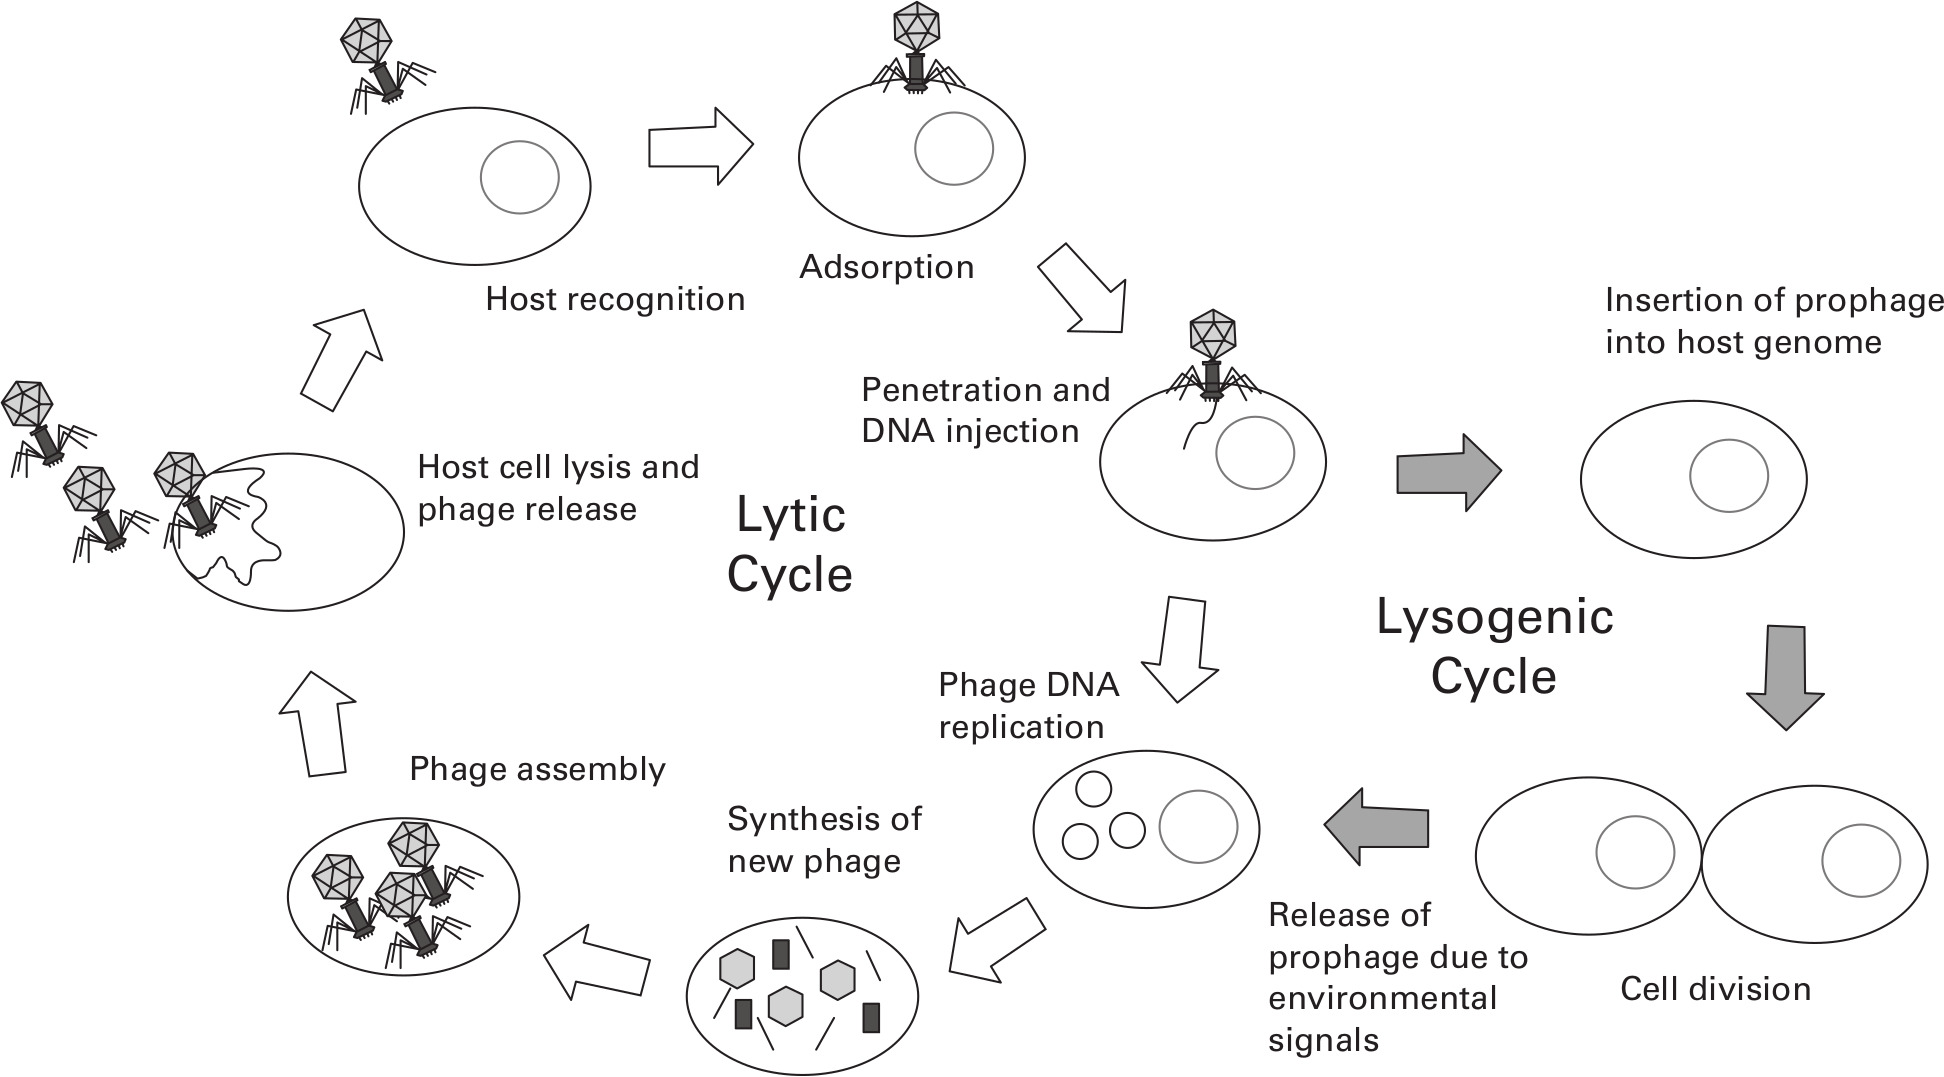 Fig. 1 
            The phage life cycle. Lytic phages proceed through the lytic cycle, in which the host is lysed and progeny phages are released into the environment. Temperate phages can go through the lytic or the lysogenic cycle. In the lysogenic cycle, the phage genome is incorporated into the host genome (prophage) but can be induced by environmental stressors, leading to the expression of phage DNA and the lytic cycle. Adapted from Doss et al.16
          